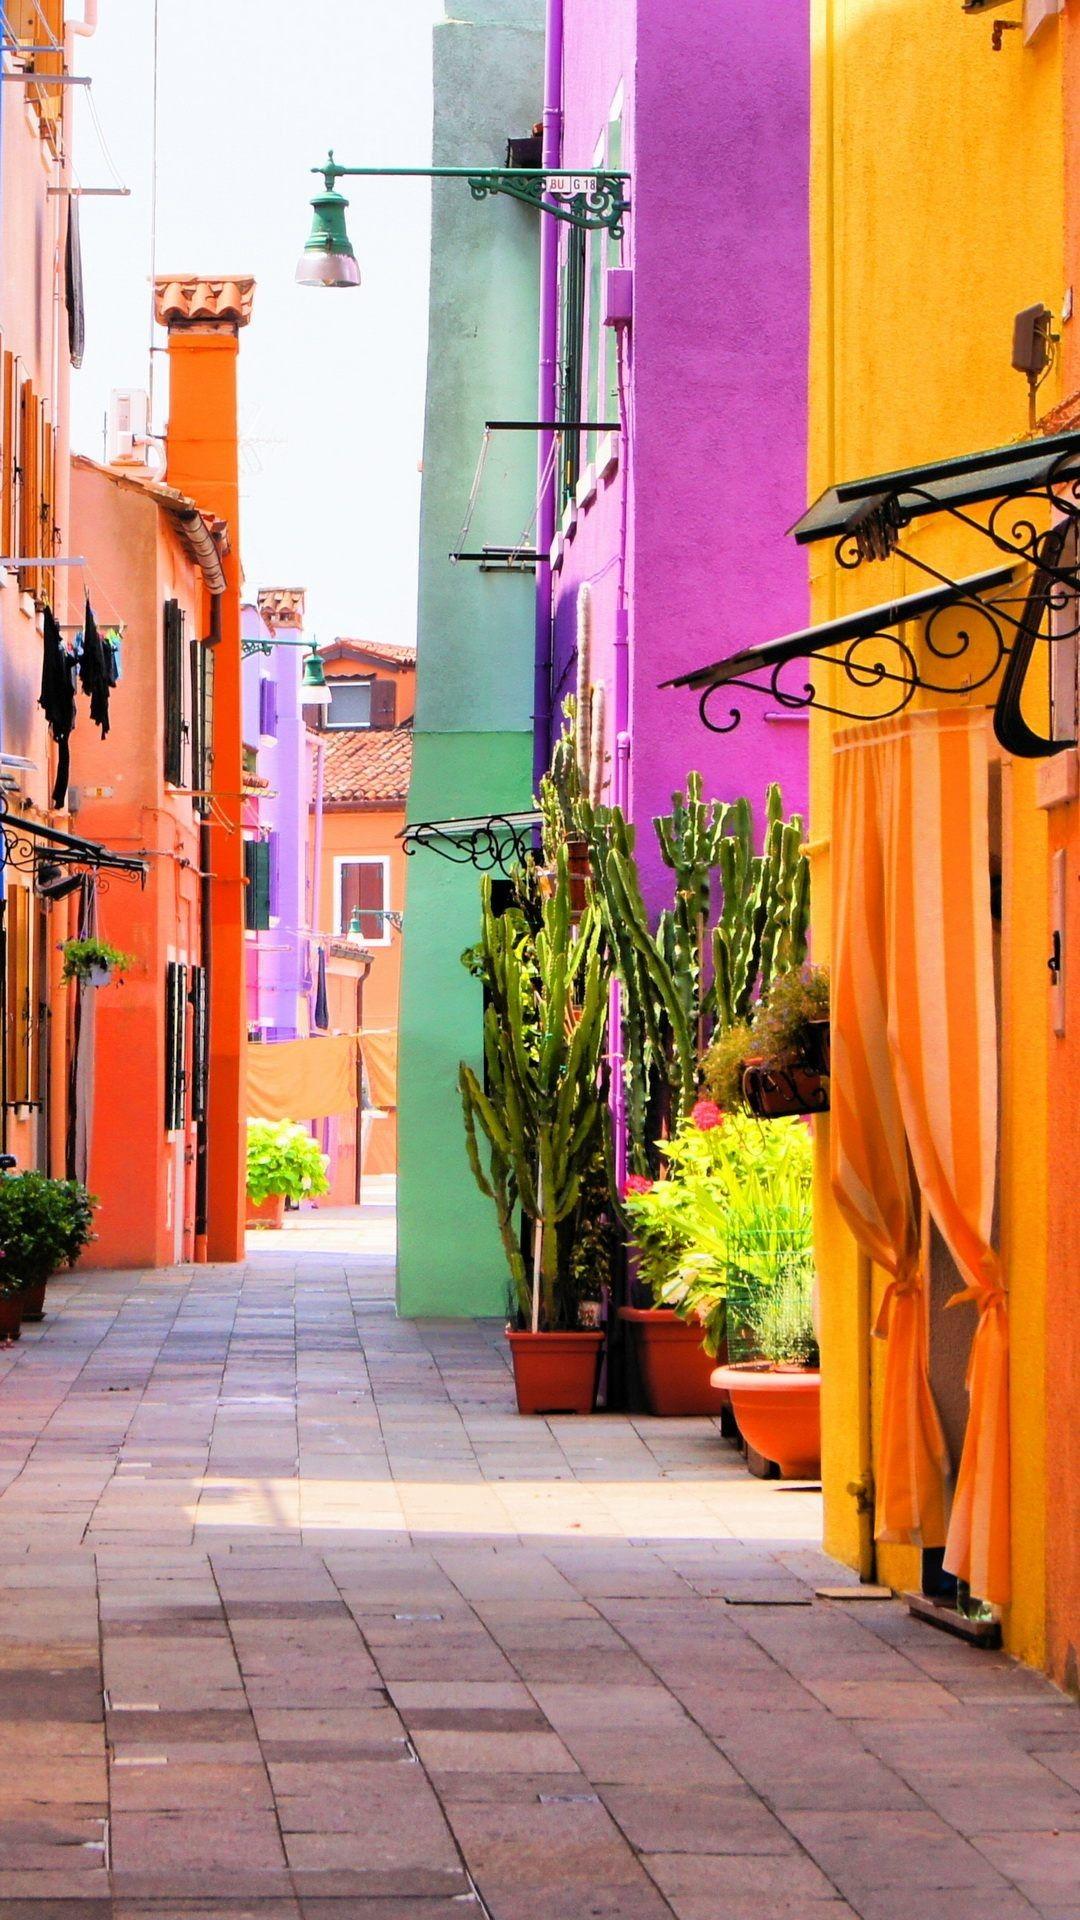 Colorful Italy Street Multicolored Houses Android Wallpaper free